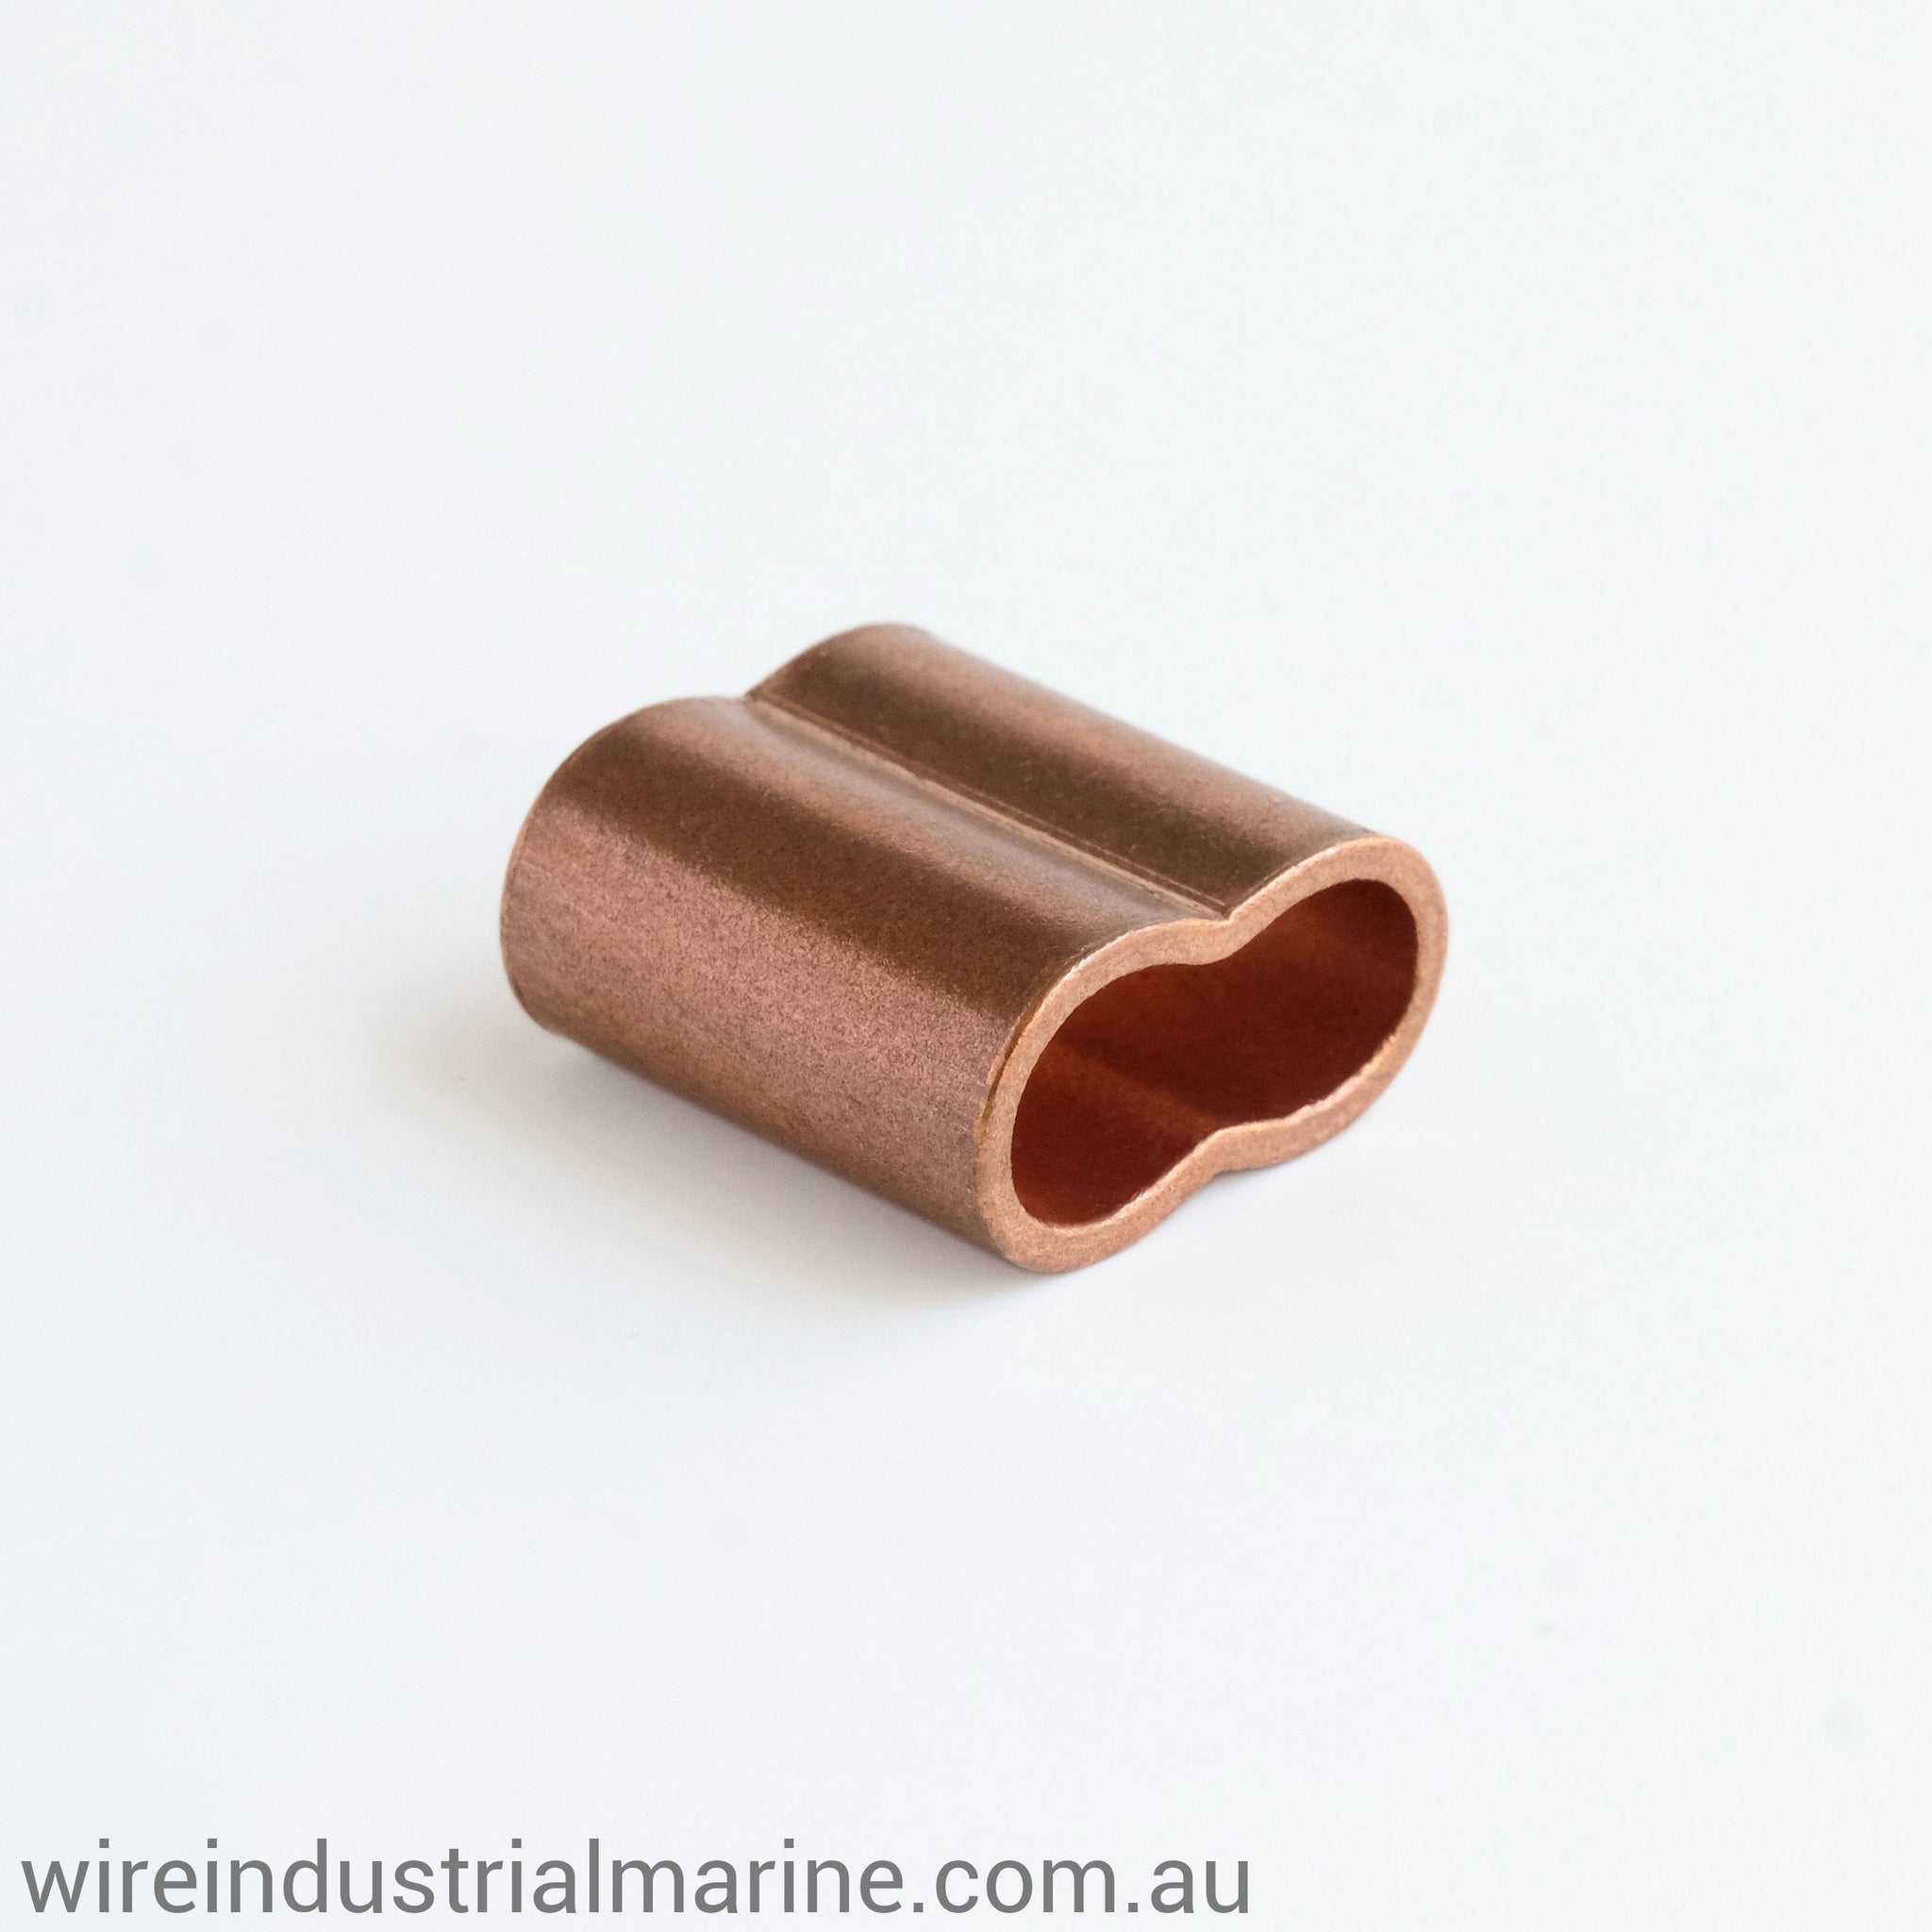 4mm Copper swage for fibre rope-CRS-4.0-wireindustrialmarine